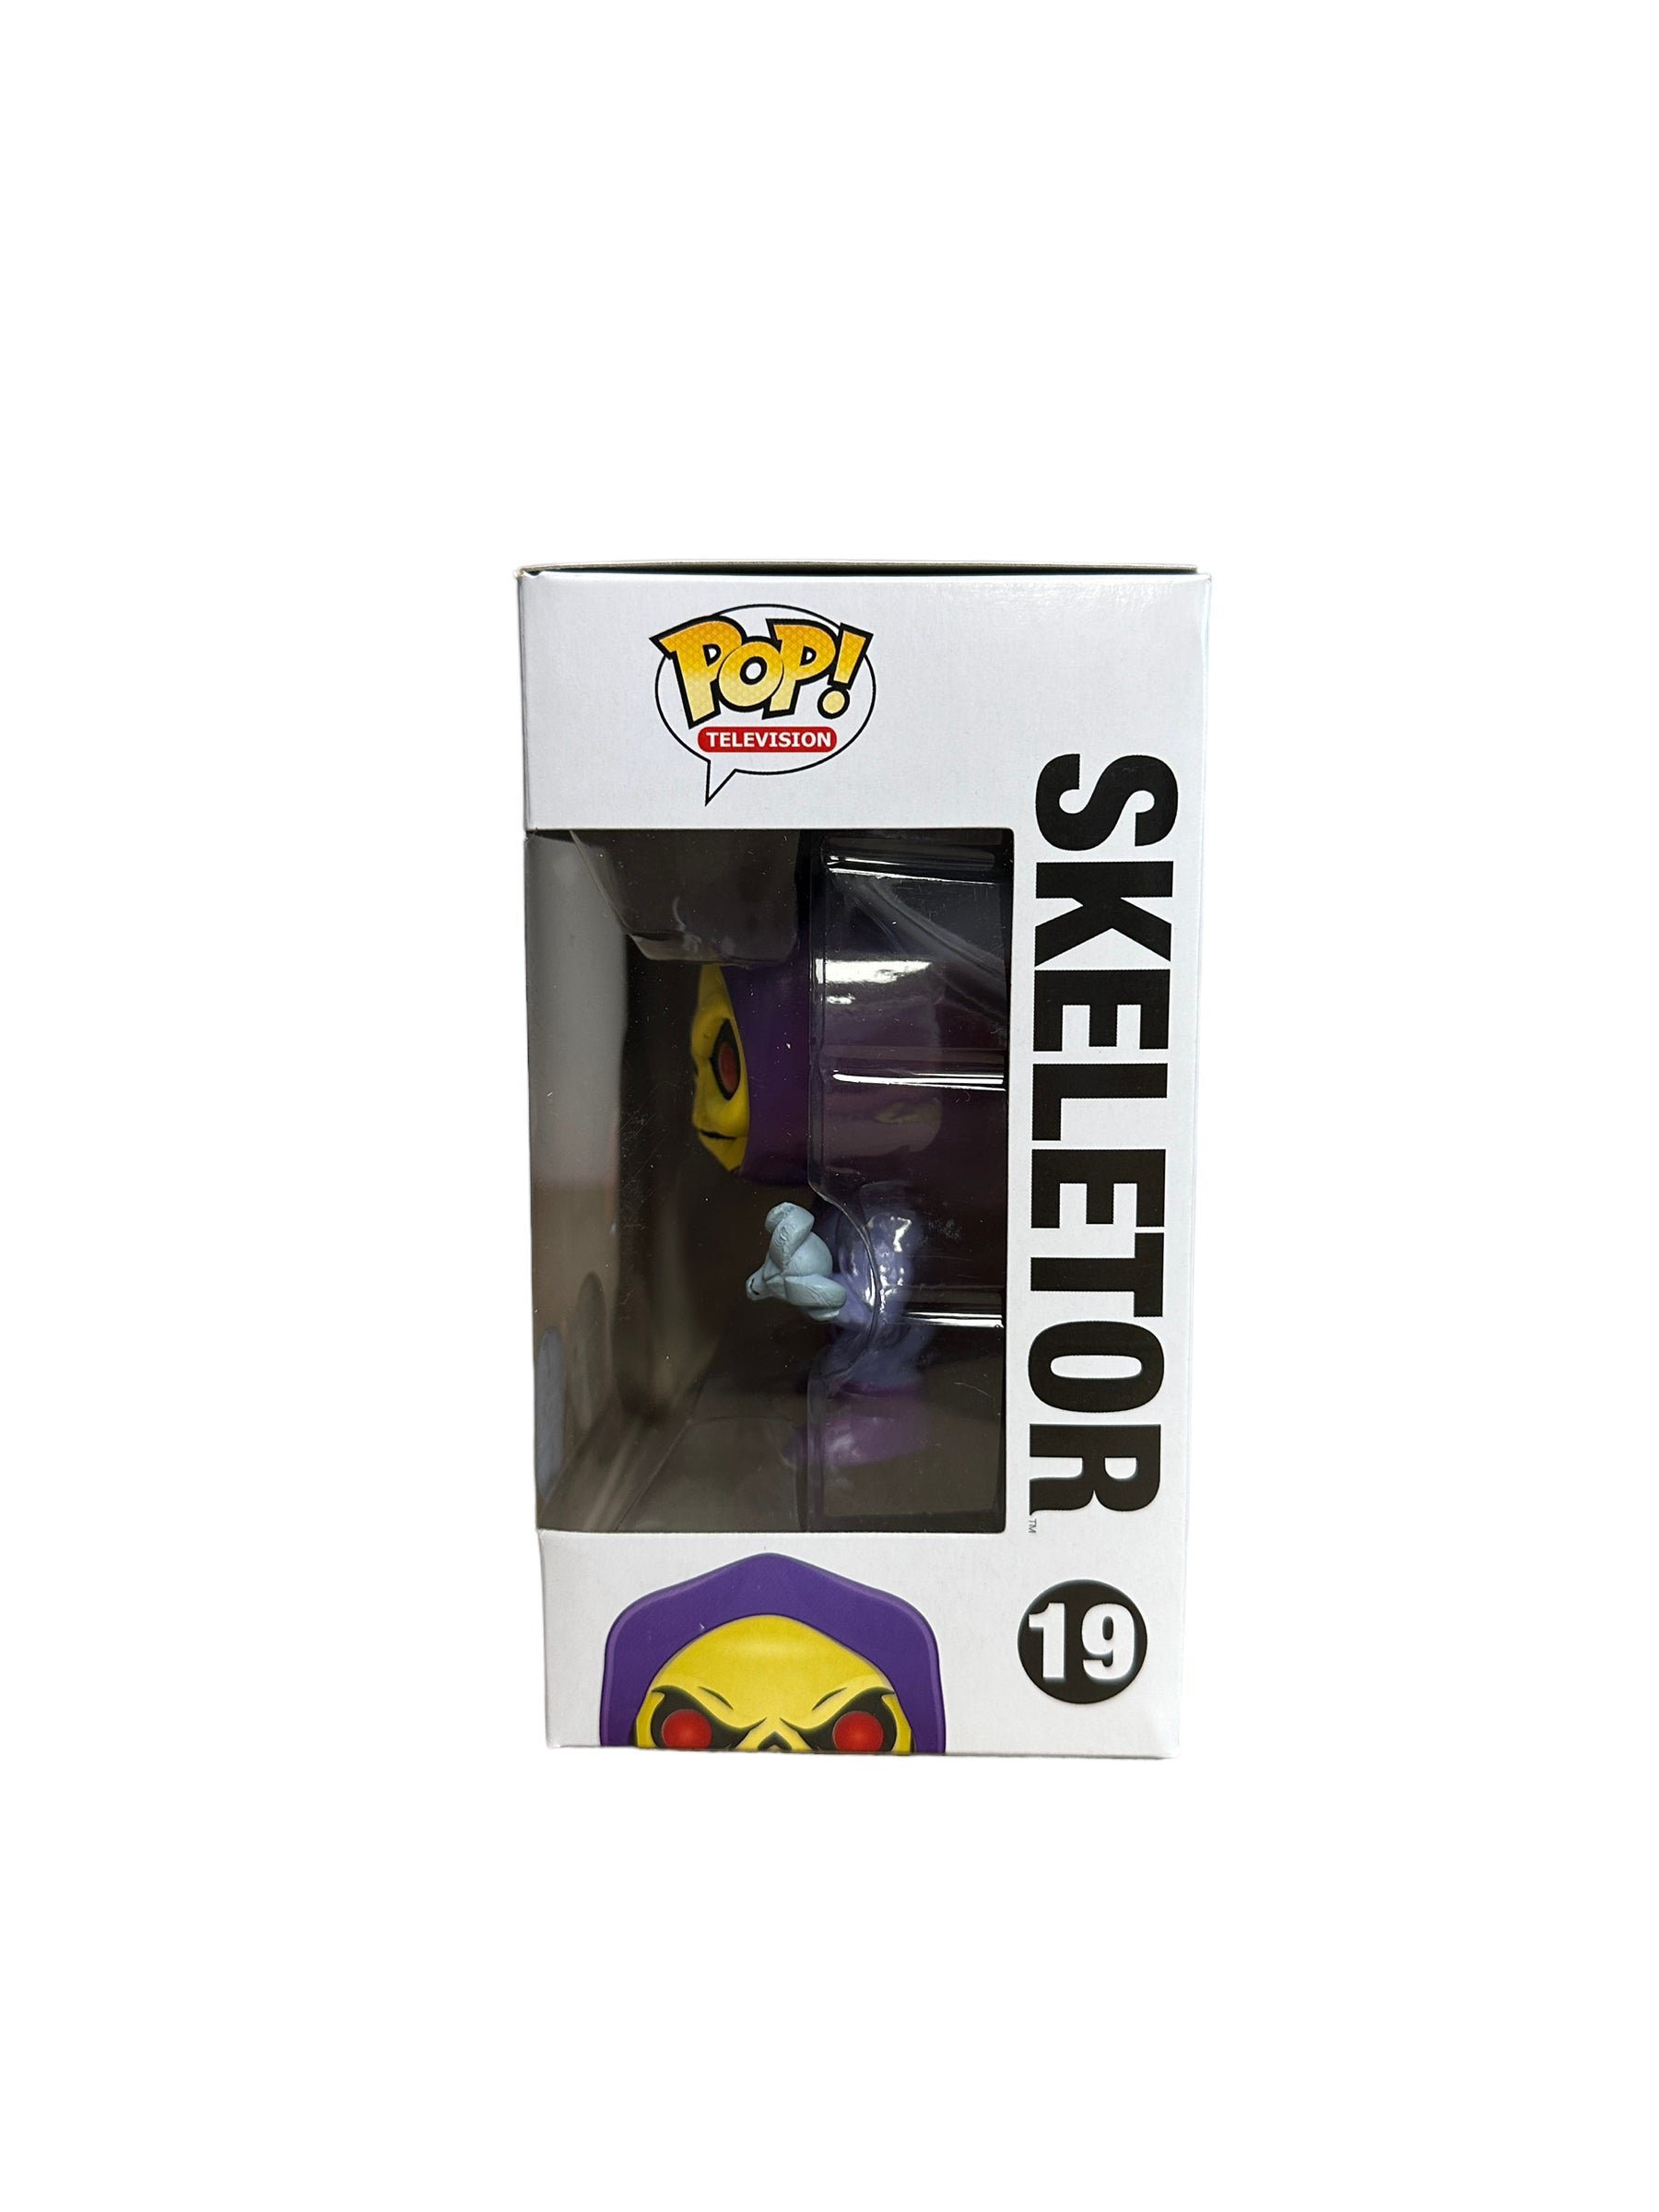 Skeletor #19 (Glows in the Dark) Funko Pop! - Masters of the Universe - Gemini Collectibles Exclusive LE480 Pcs - Condition 8.75/10